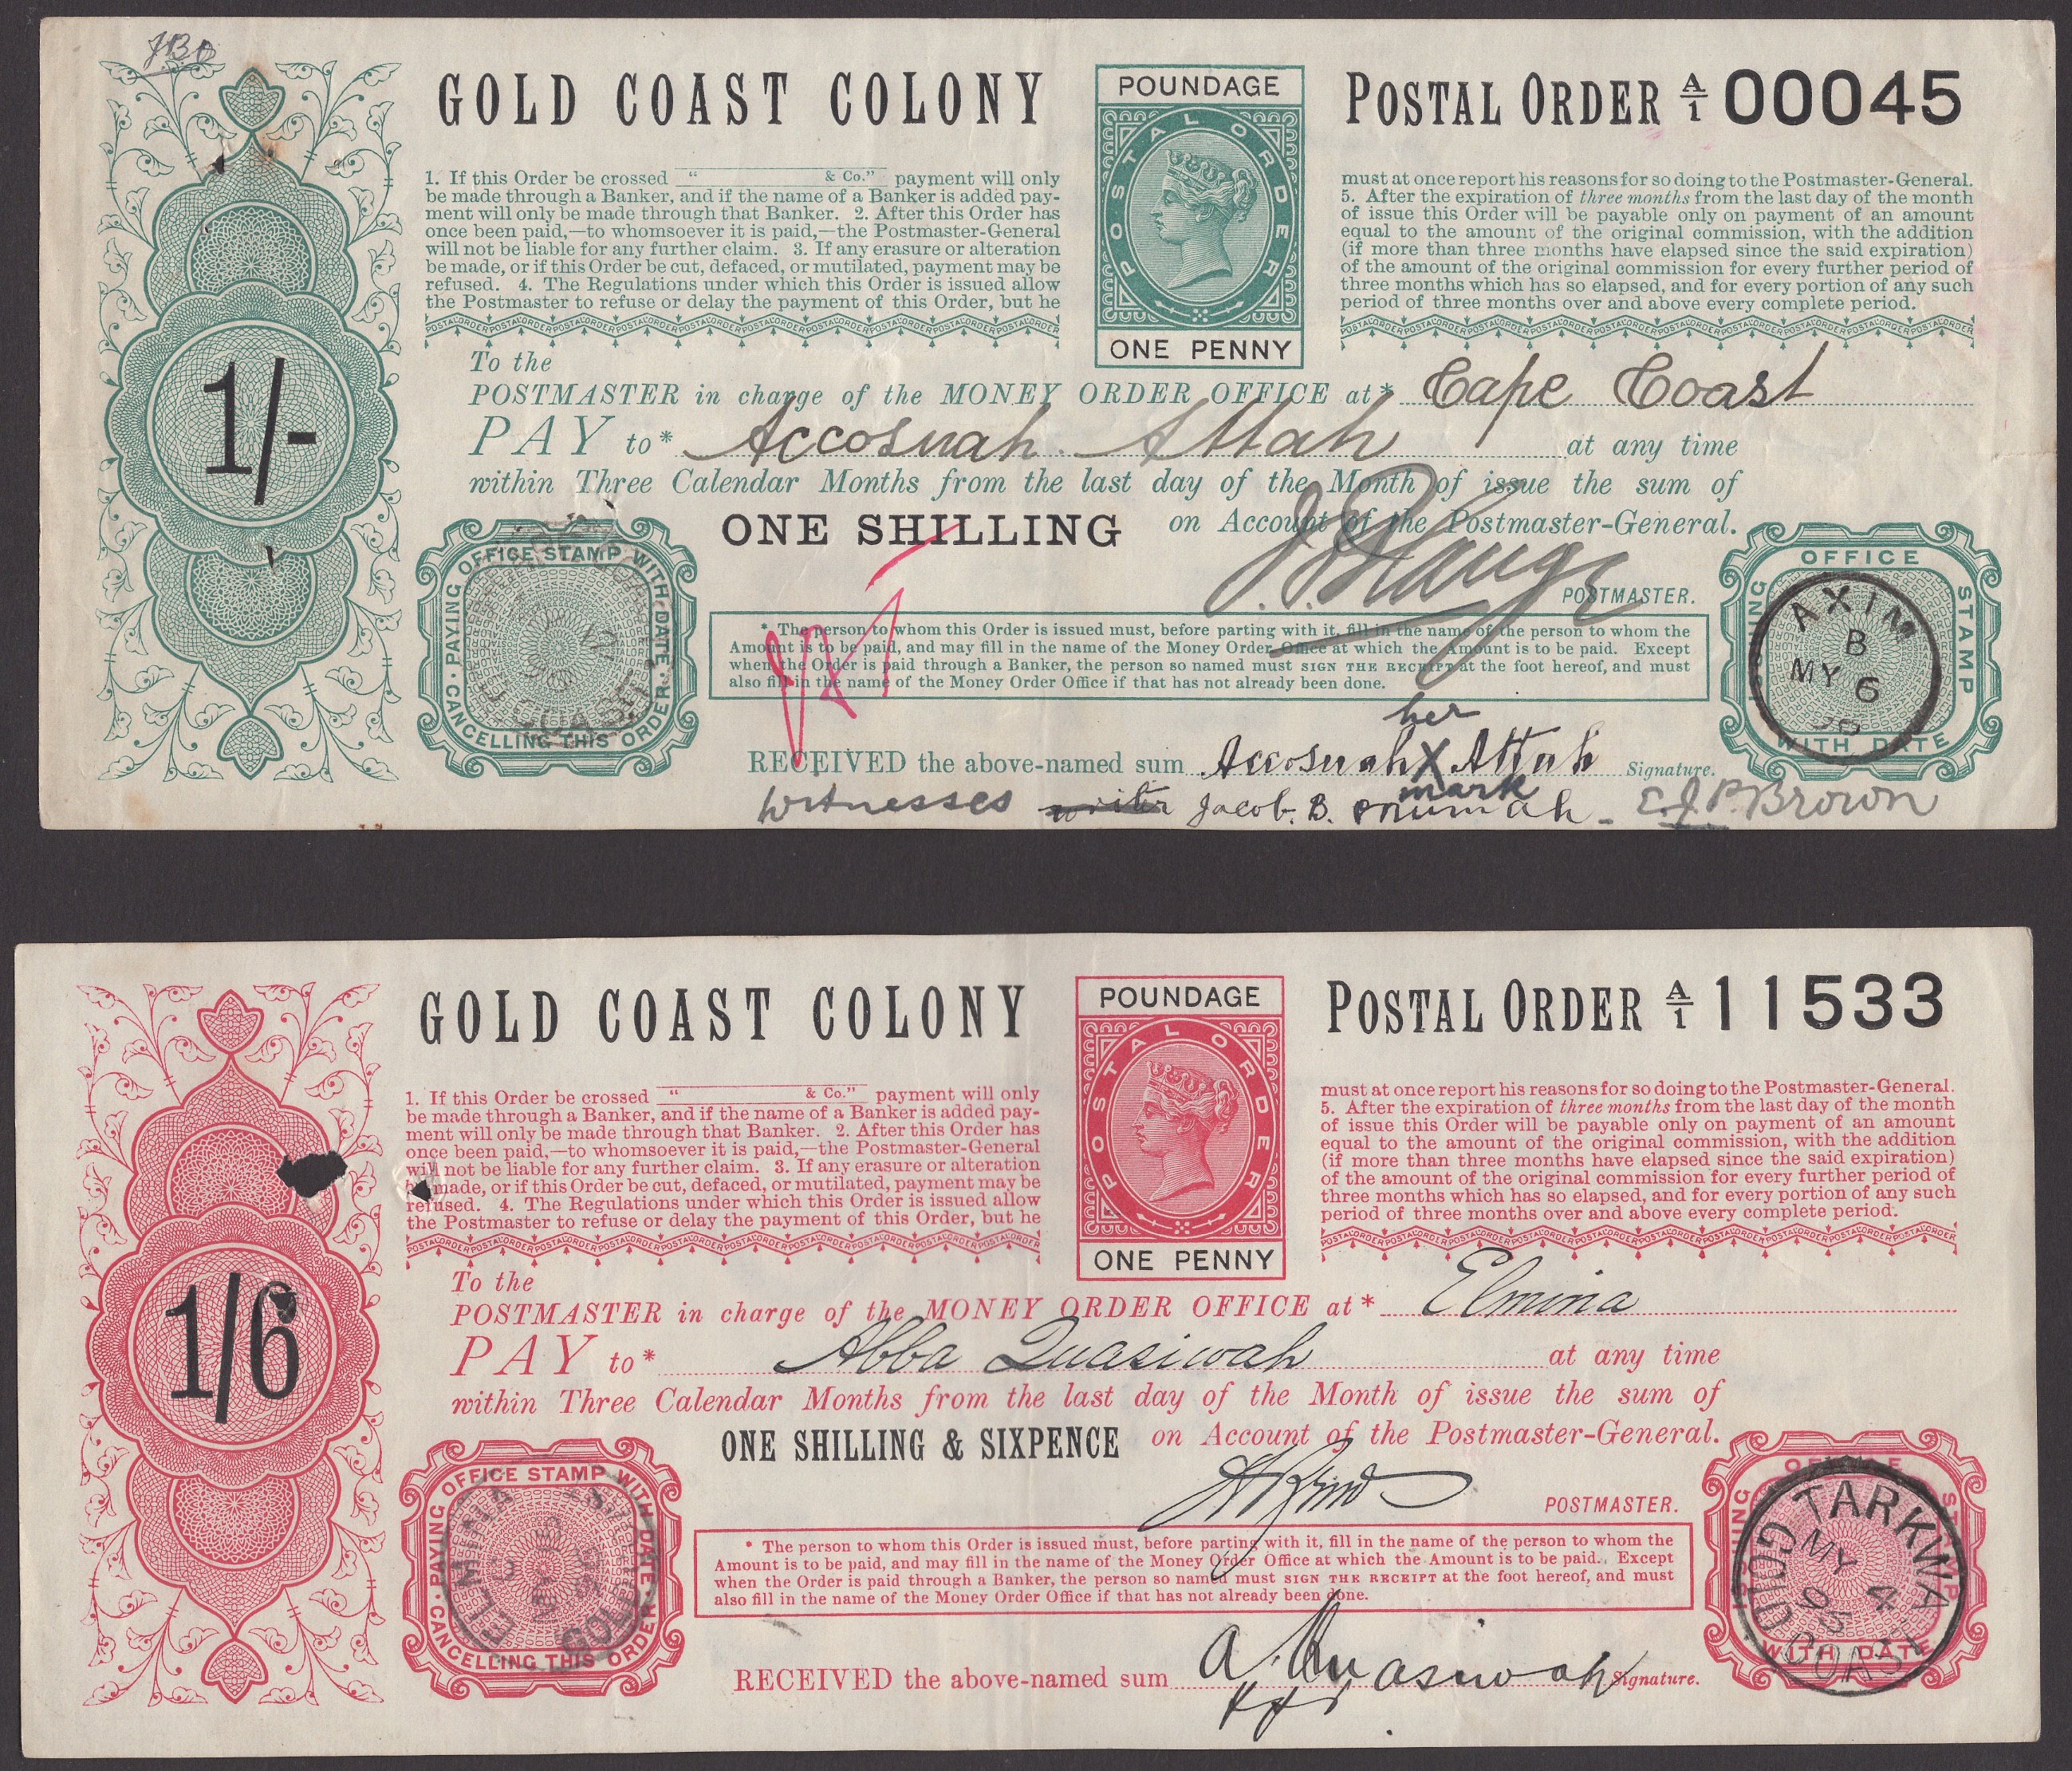 Gold Coast Colony (now Ghana), Postal Orders, a remarkable set of Victorian postal orders...